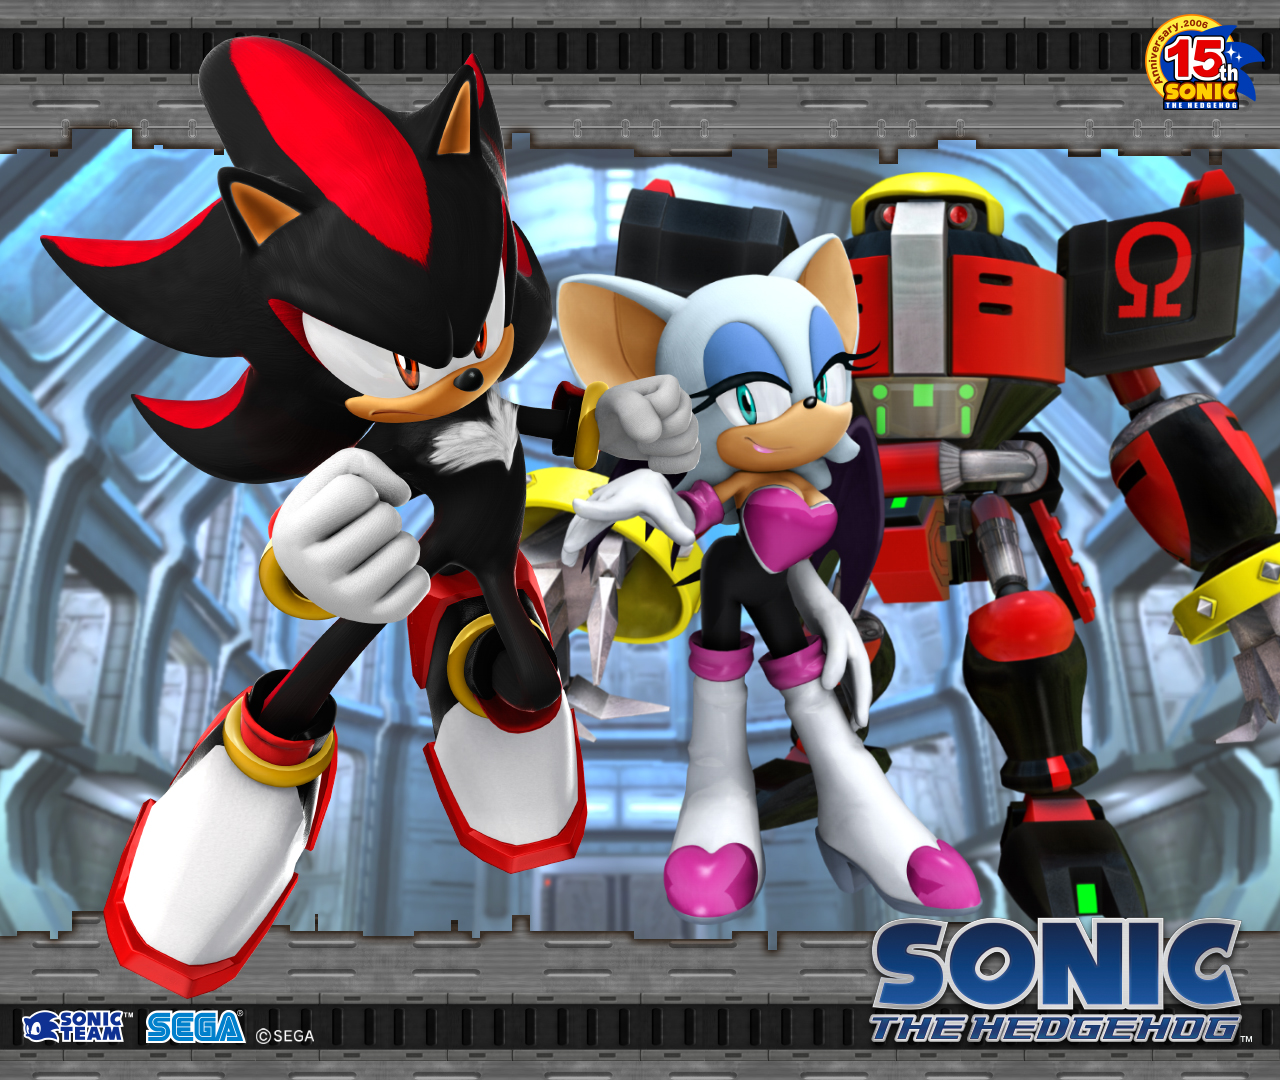 Sonic 06 Wallpapers  Sonic the Hedgehog Amino